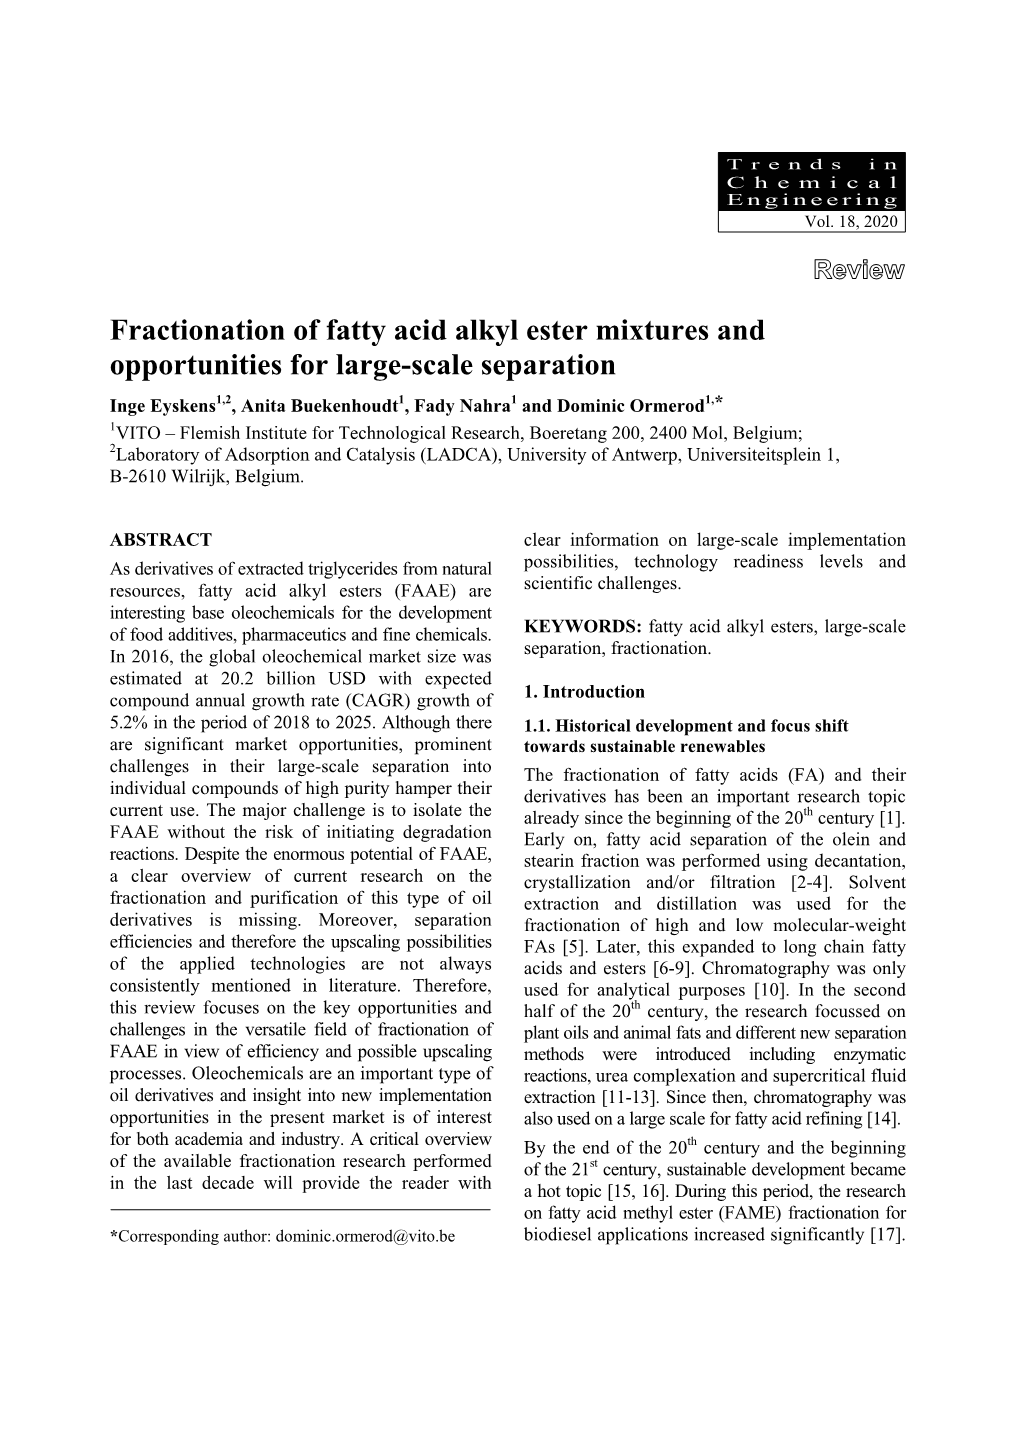 Fractionation of Fatty Acid Alkyl Ester Mixtures and Opportunities for Large-Scale Separation